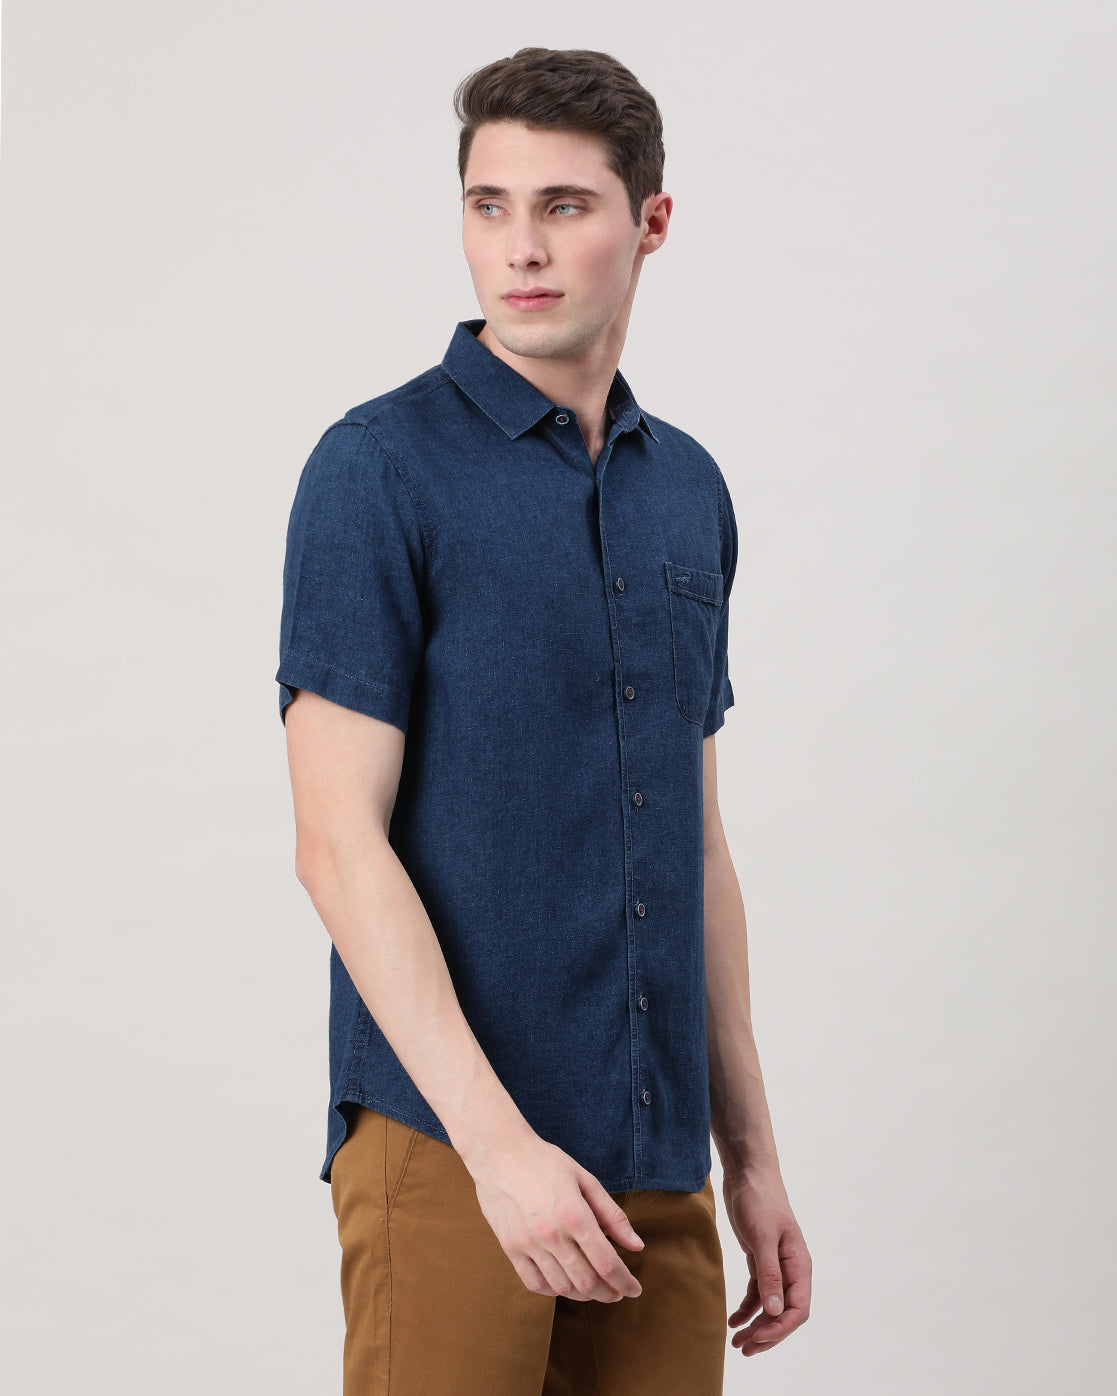 Casual Indigo Half Sleeve Comfort Fit Printed Shirt with Collar for Men